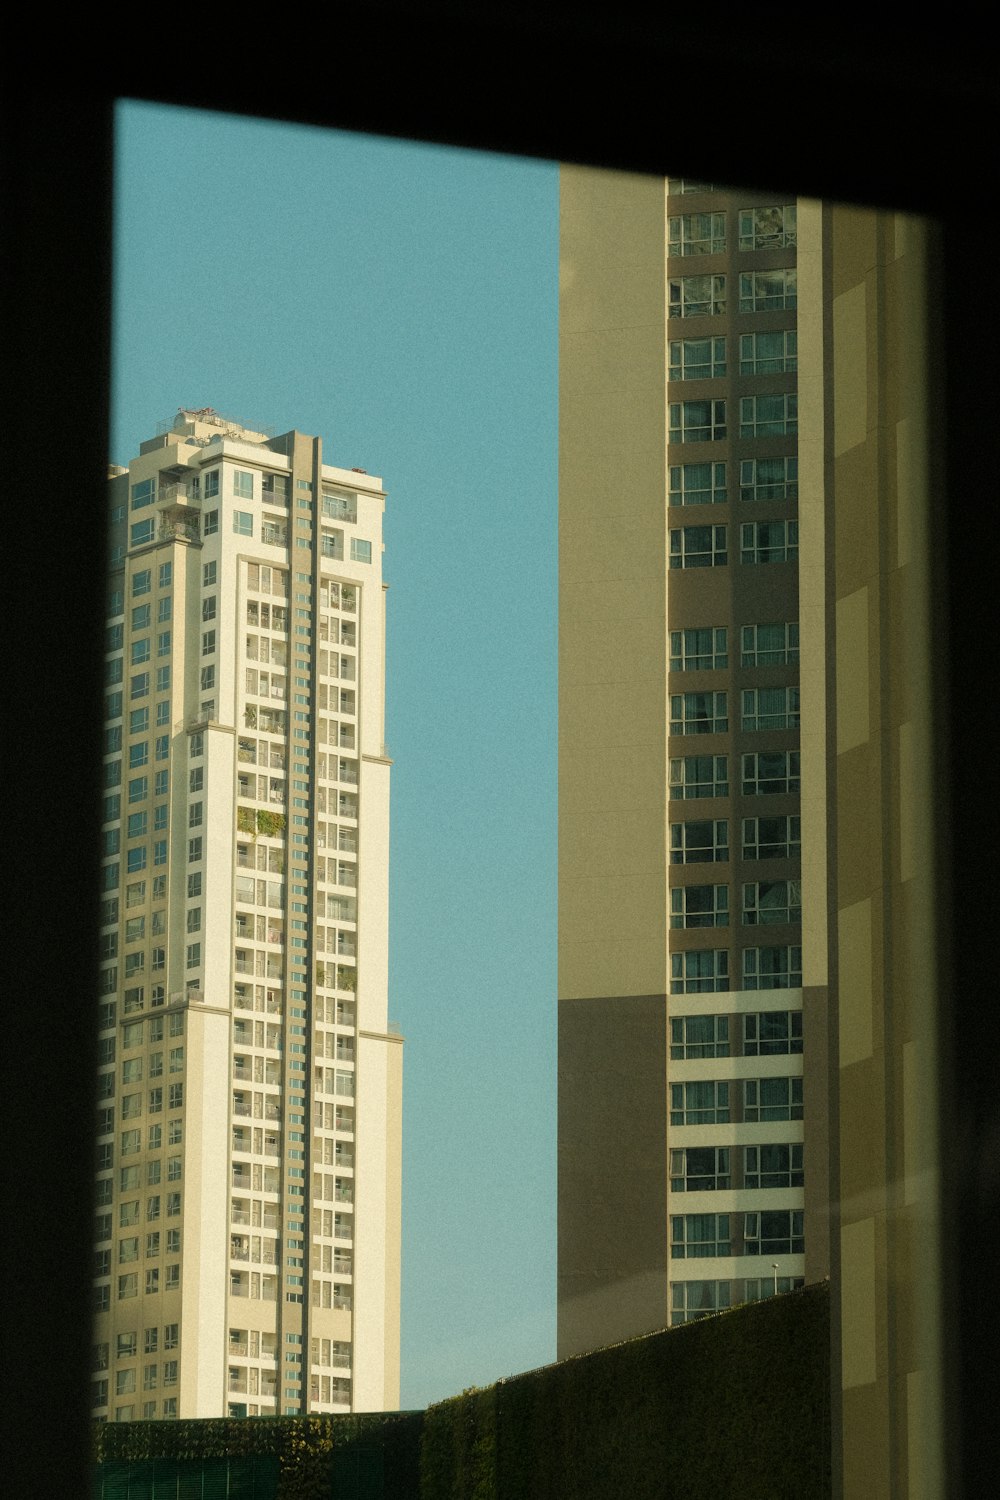 a view of two tall buildings from a window